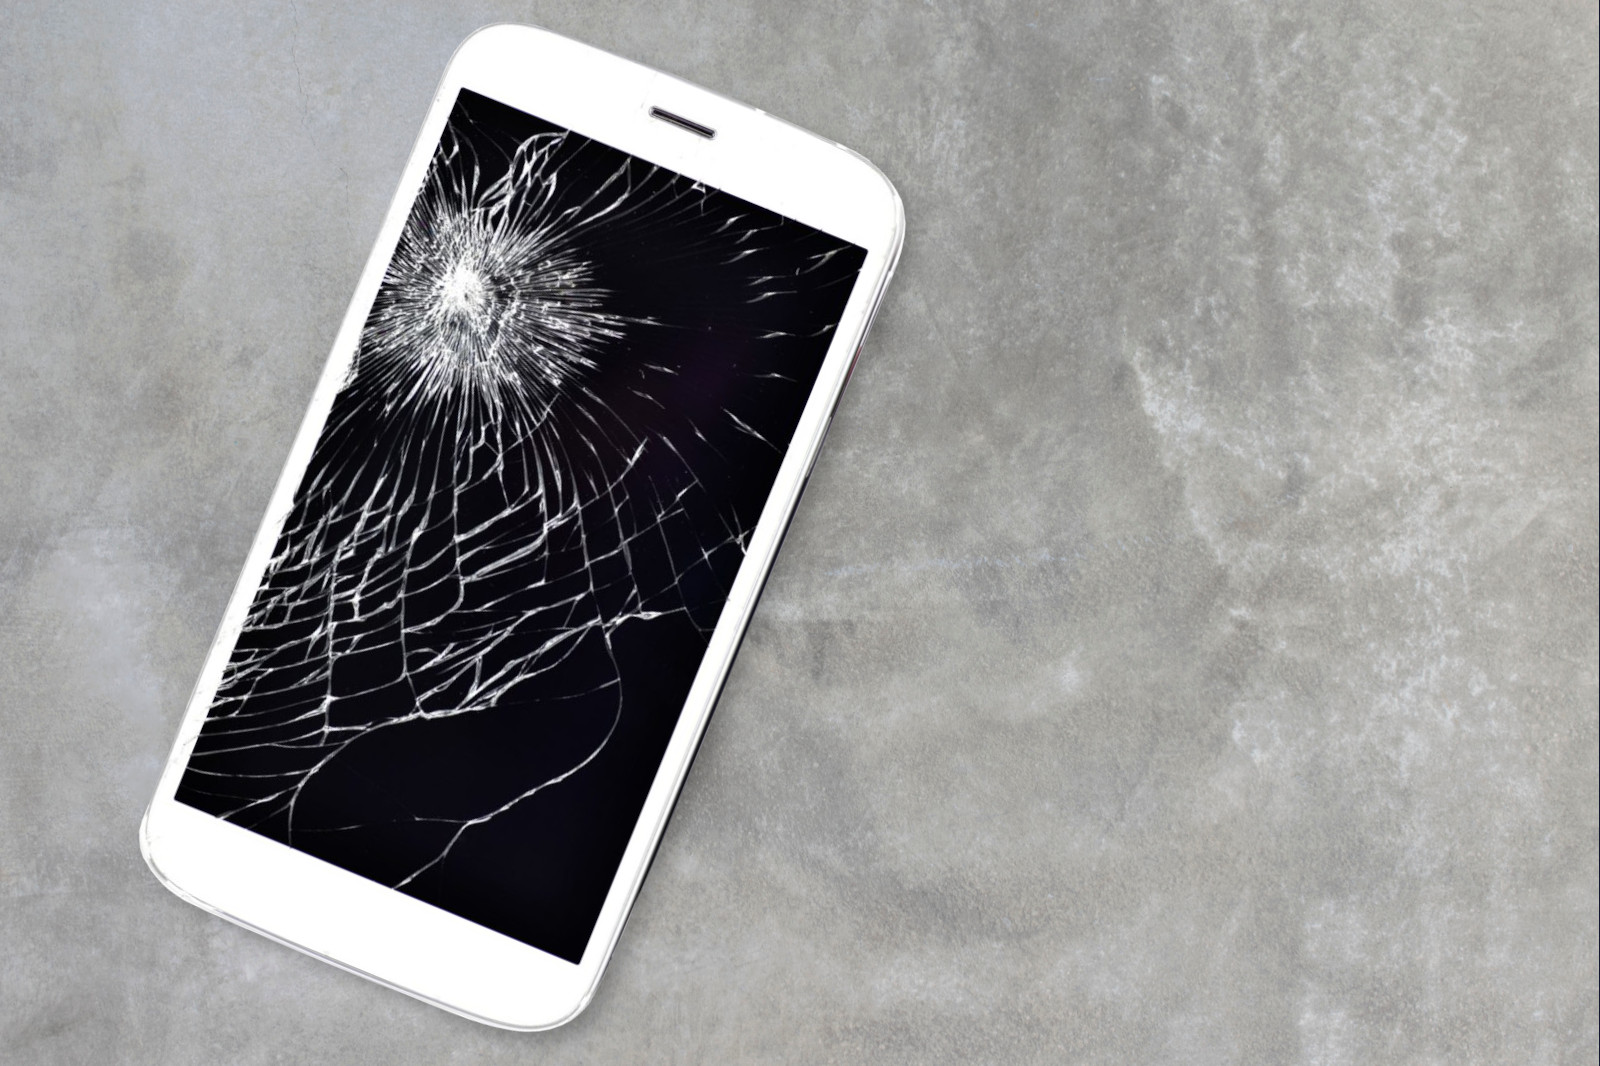 Fixing The Broken Screen On Your Phone May Be Easier Than You Think